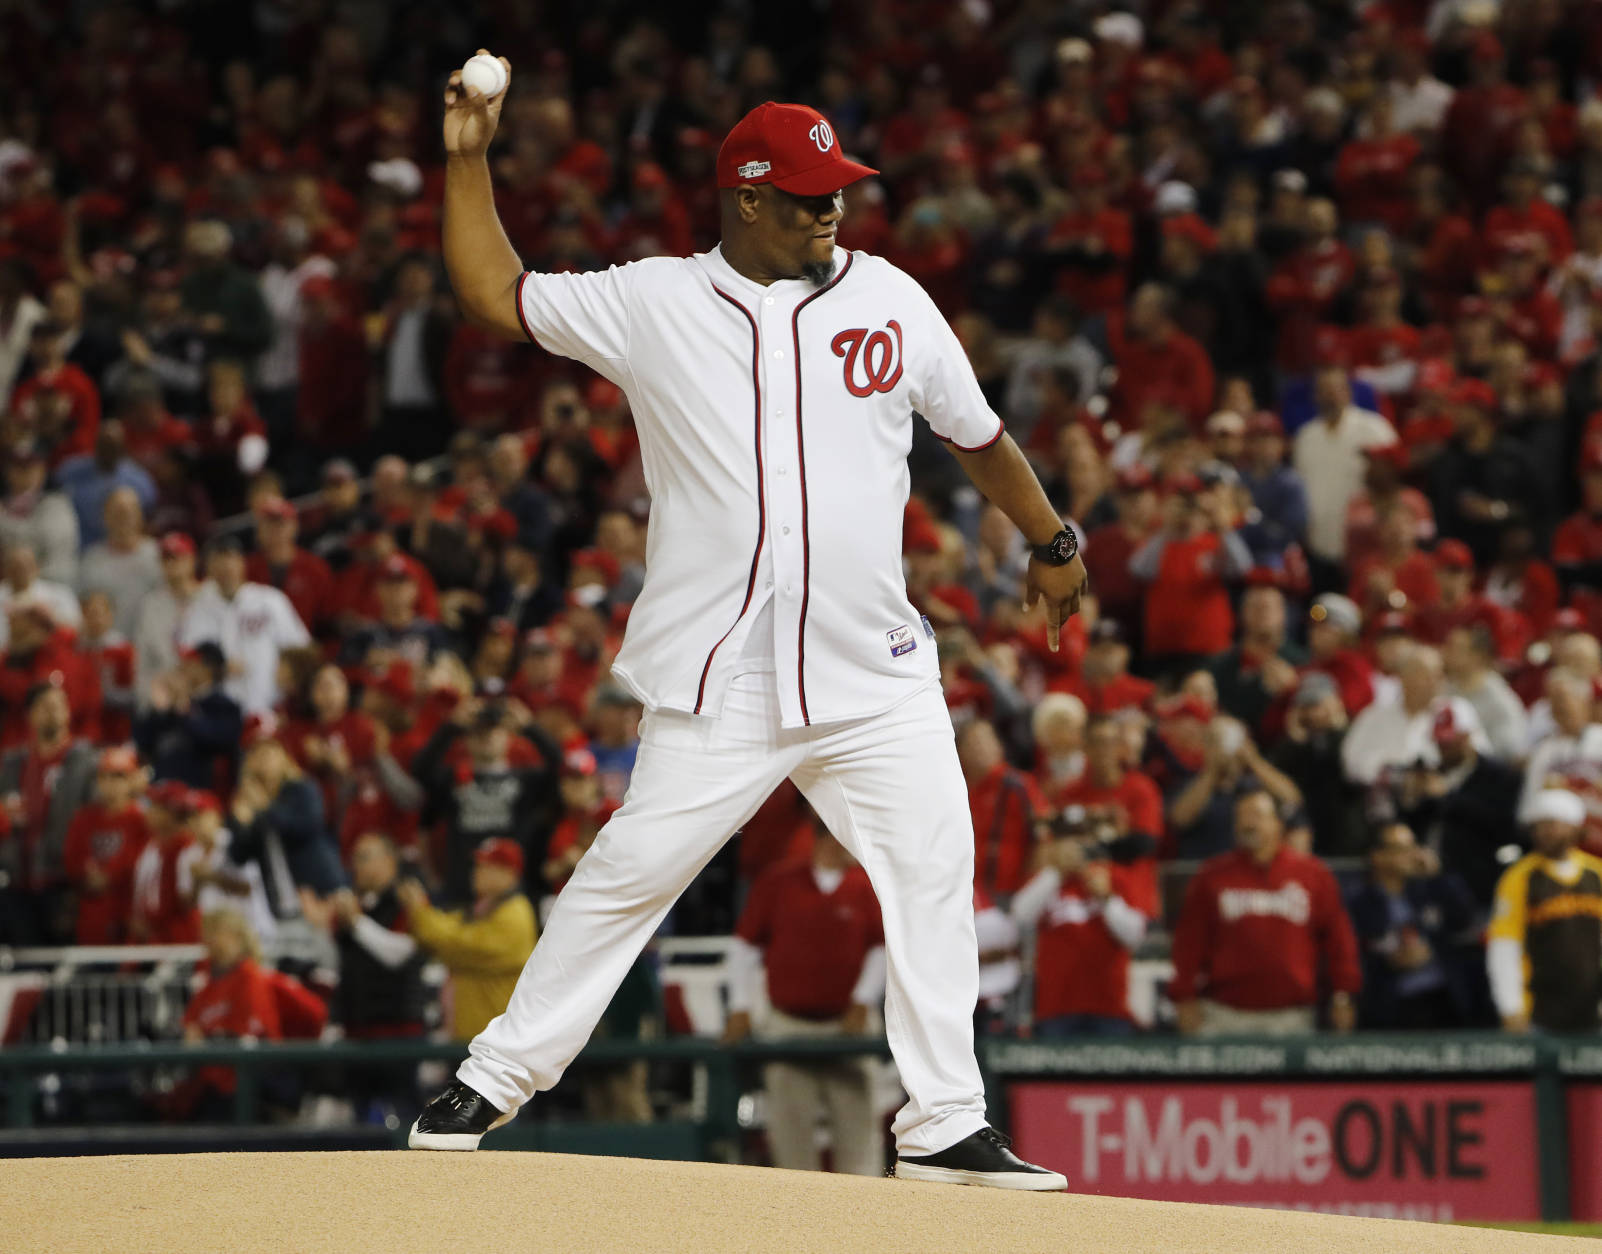 Former Washington Nationals pitcher Livan Hernandez throws out a ceremonial first pitch at Game 5 of baseball's National League Division Series between the Nationals and the Los Angeles Dodgers at Nationals Park, Thursday, Oct. 13, 2016, in Washington. (AP Photo/Pablo Martinez Monsivais)